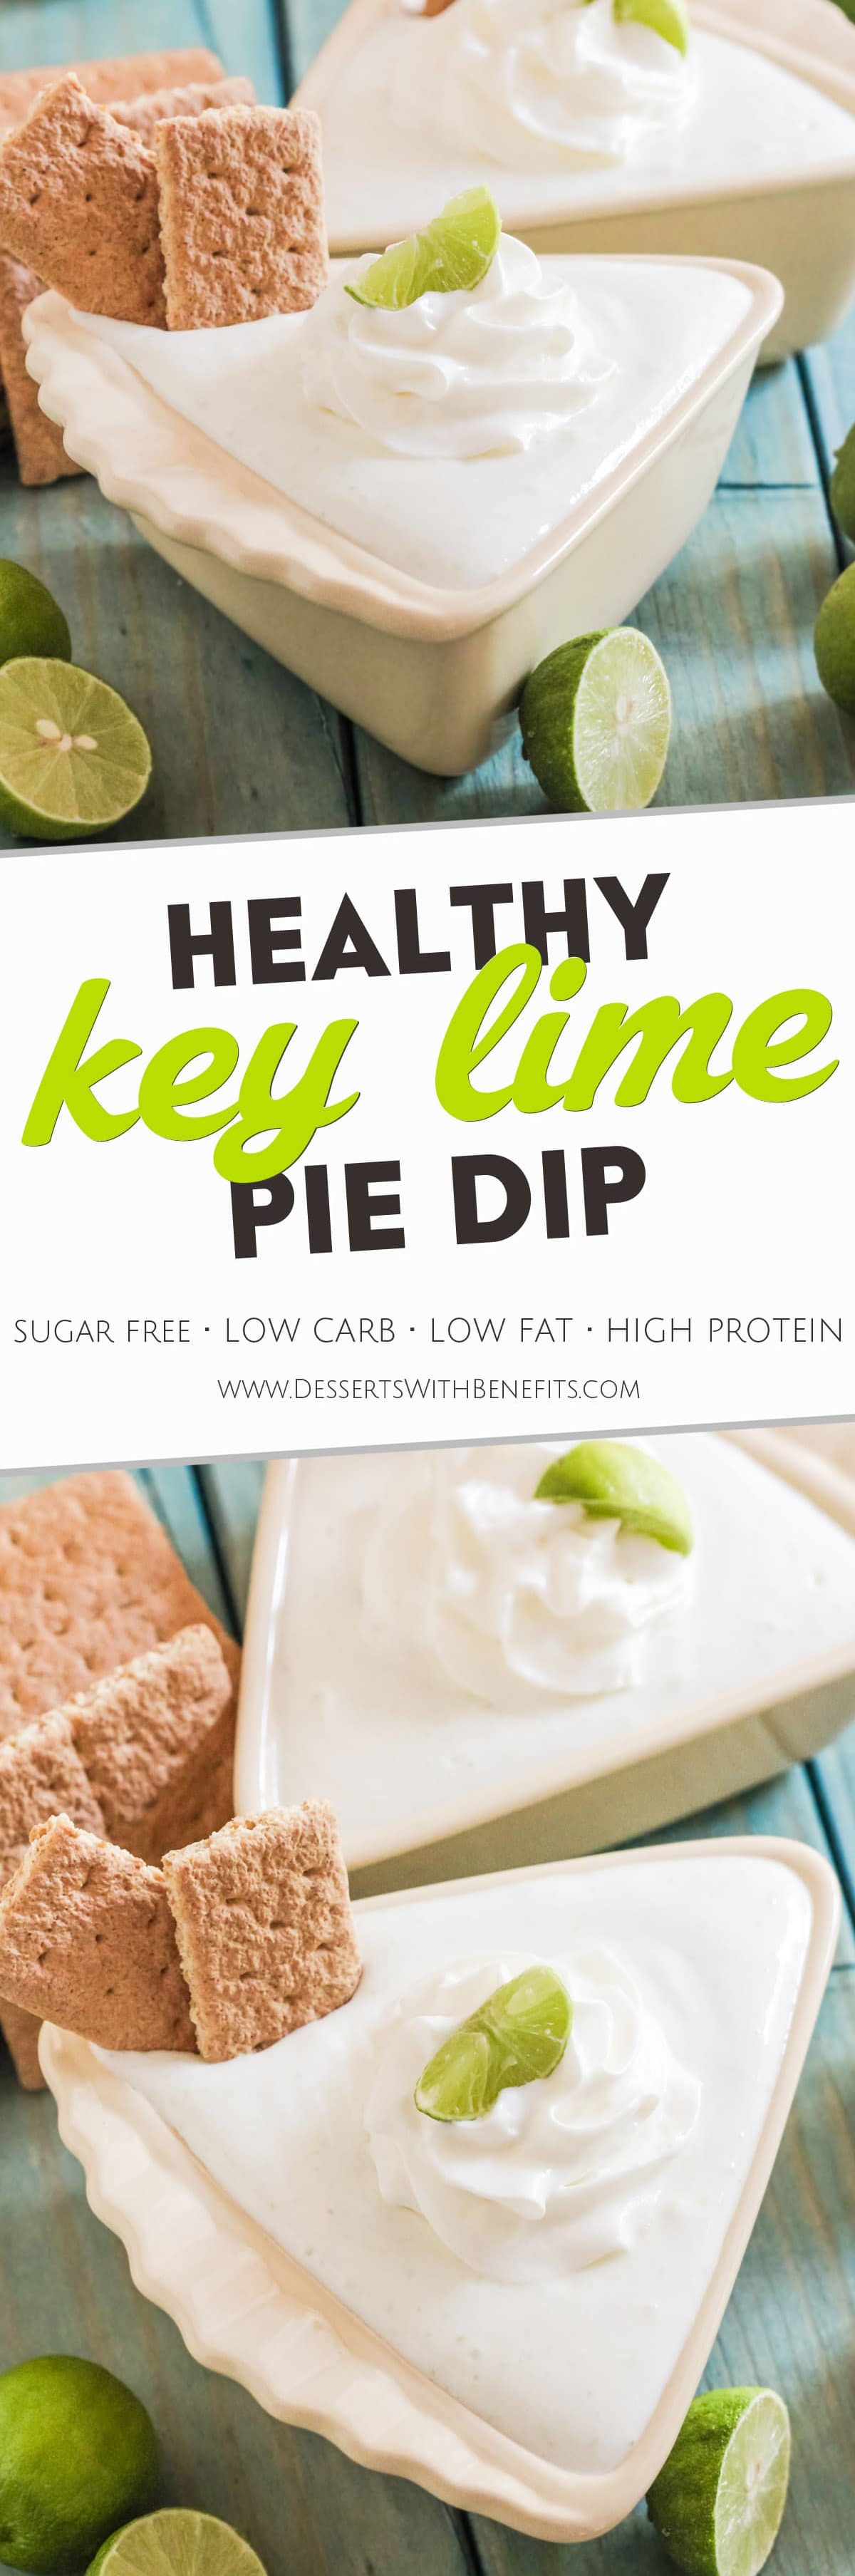 Healthy Key Lime Pie Dip! In the mood for Key Lime Pie but don't have time to bake an entire pie? Make this Healthy Key Lime Pie Dip! All the flavor of Key Lime Pie, but sugar free, low carb, low fat, high protein, gluten free, and only 5 ingredients! Healthy Dessert Recipes at the Desserts With Benefits Blog (www.DessertsWithBenefits.com).